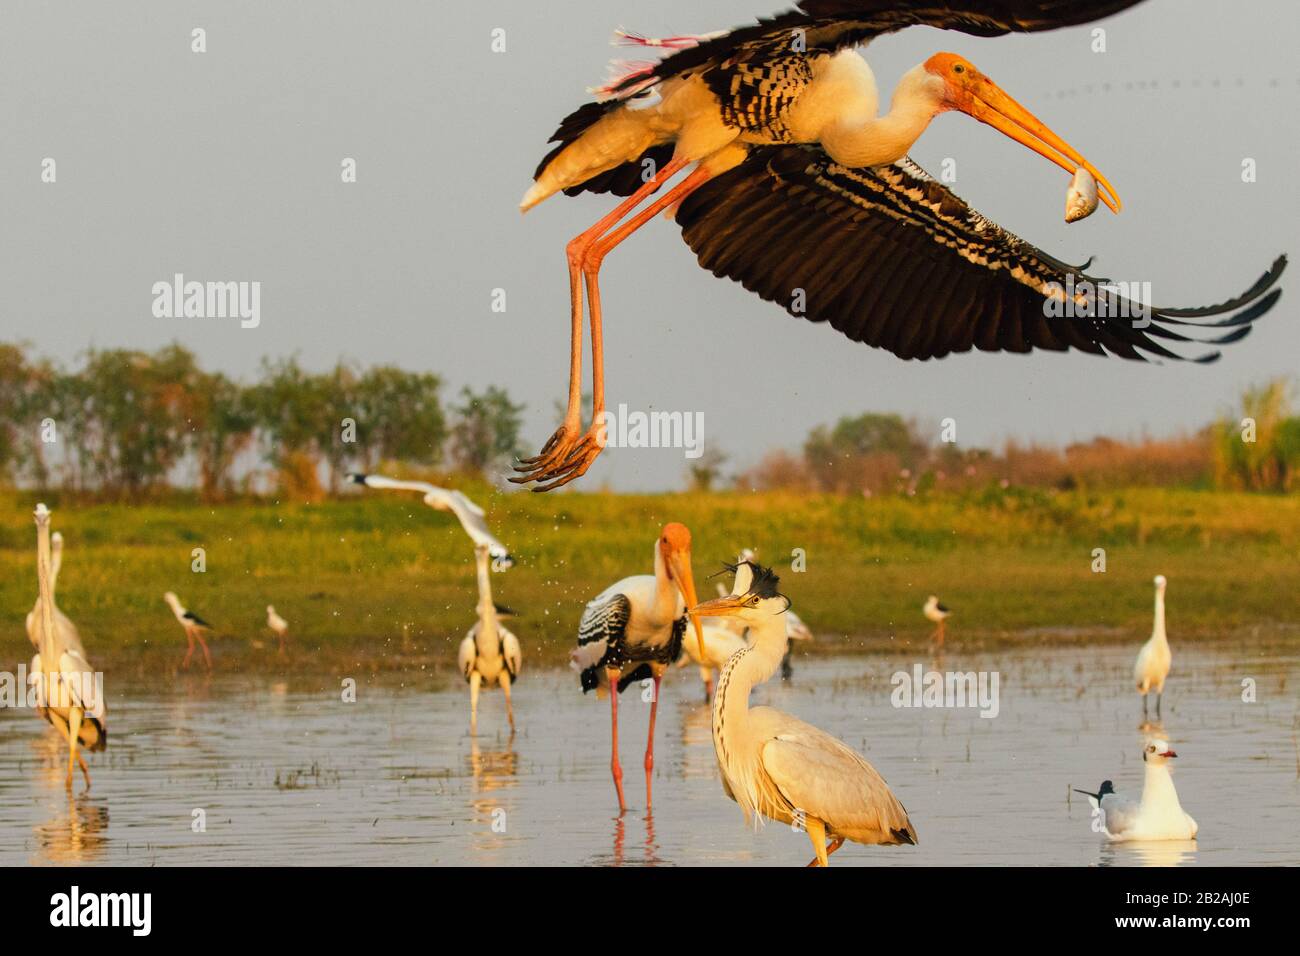 Painted stork, grey heron, and seagulls in a lake Stock Photo